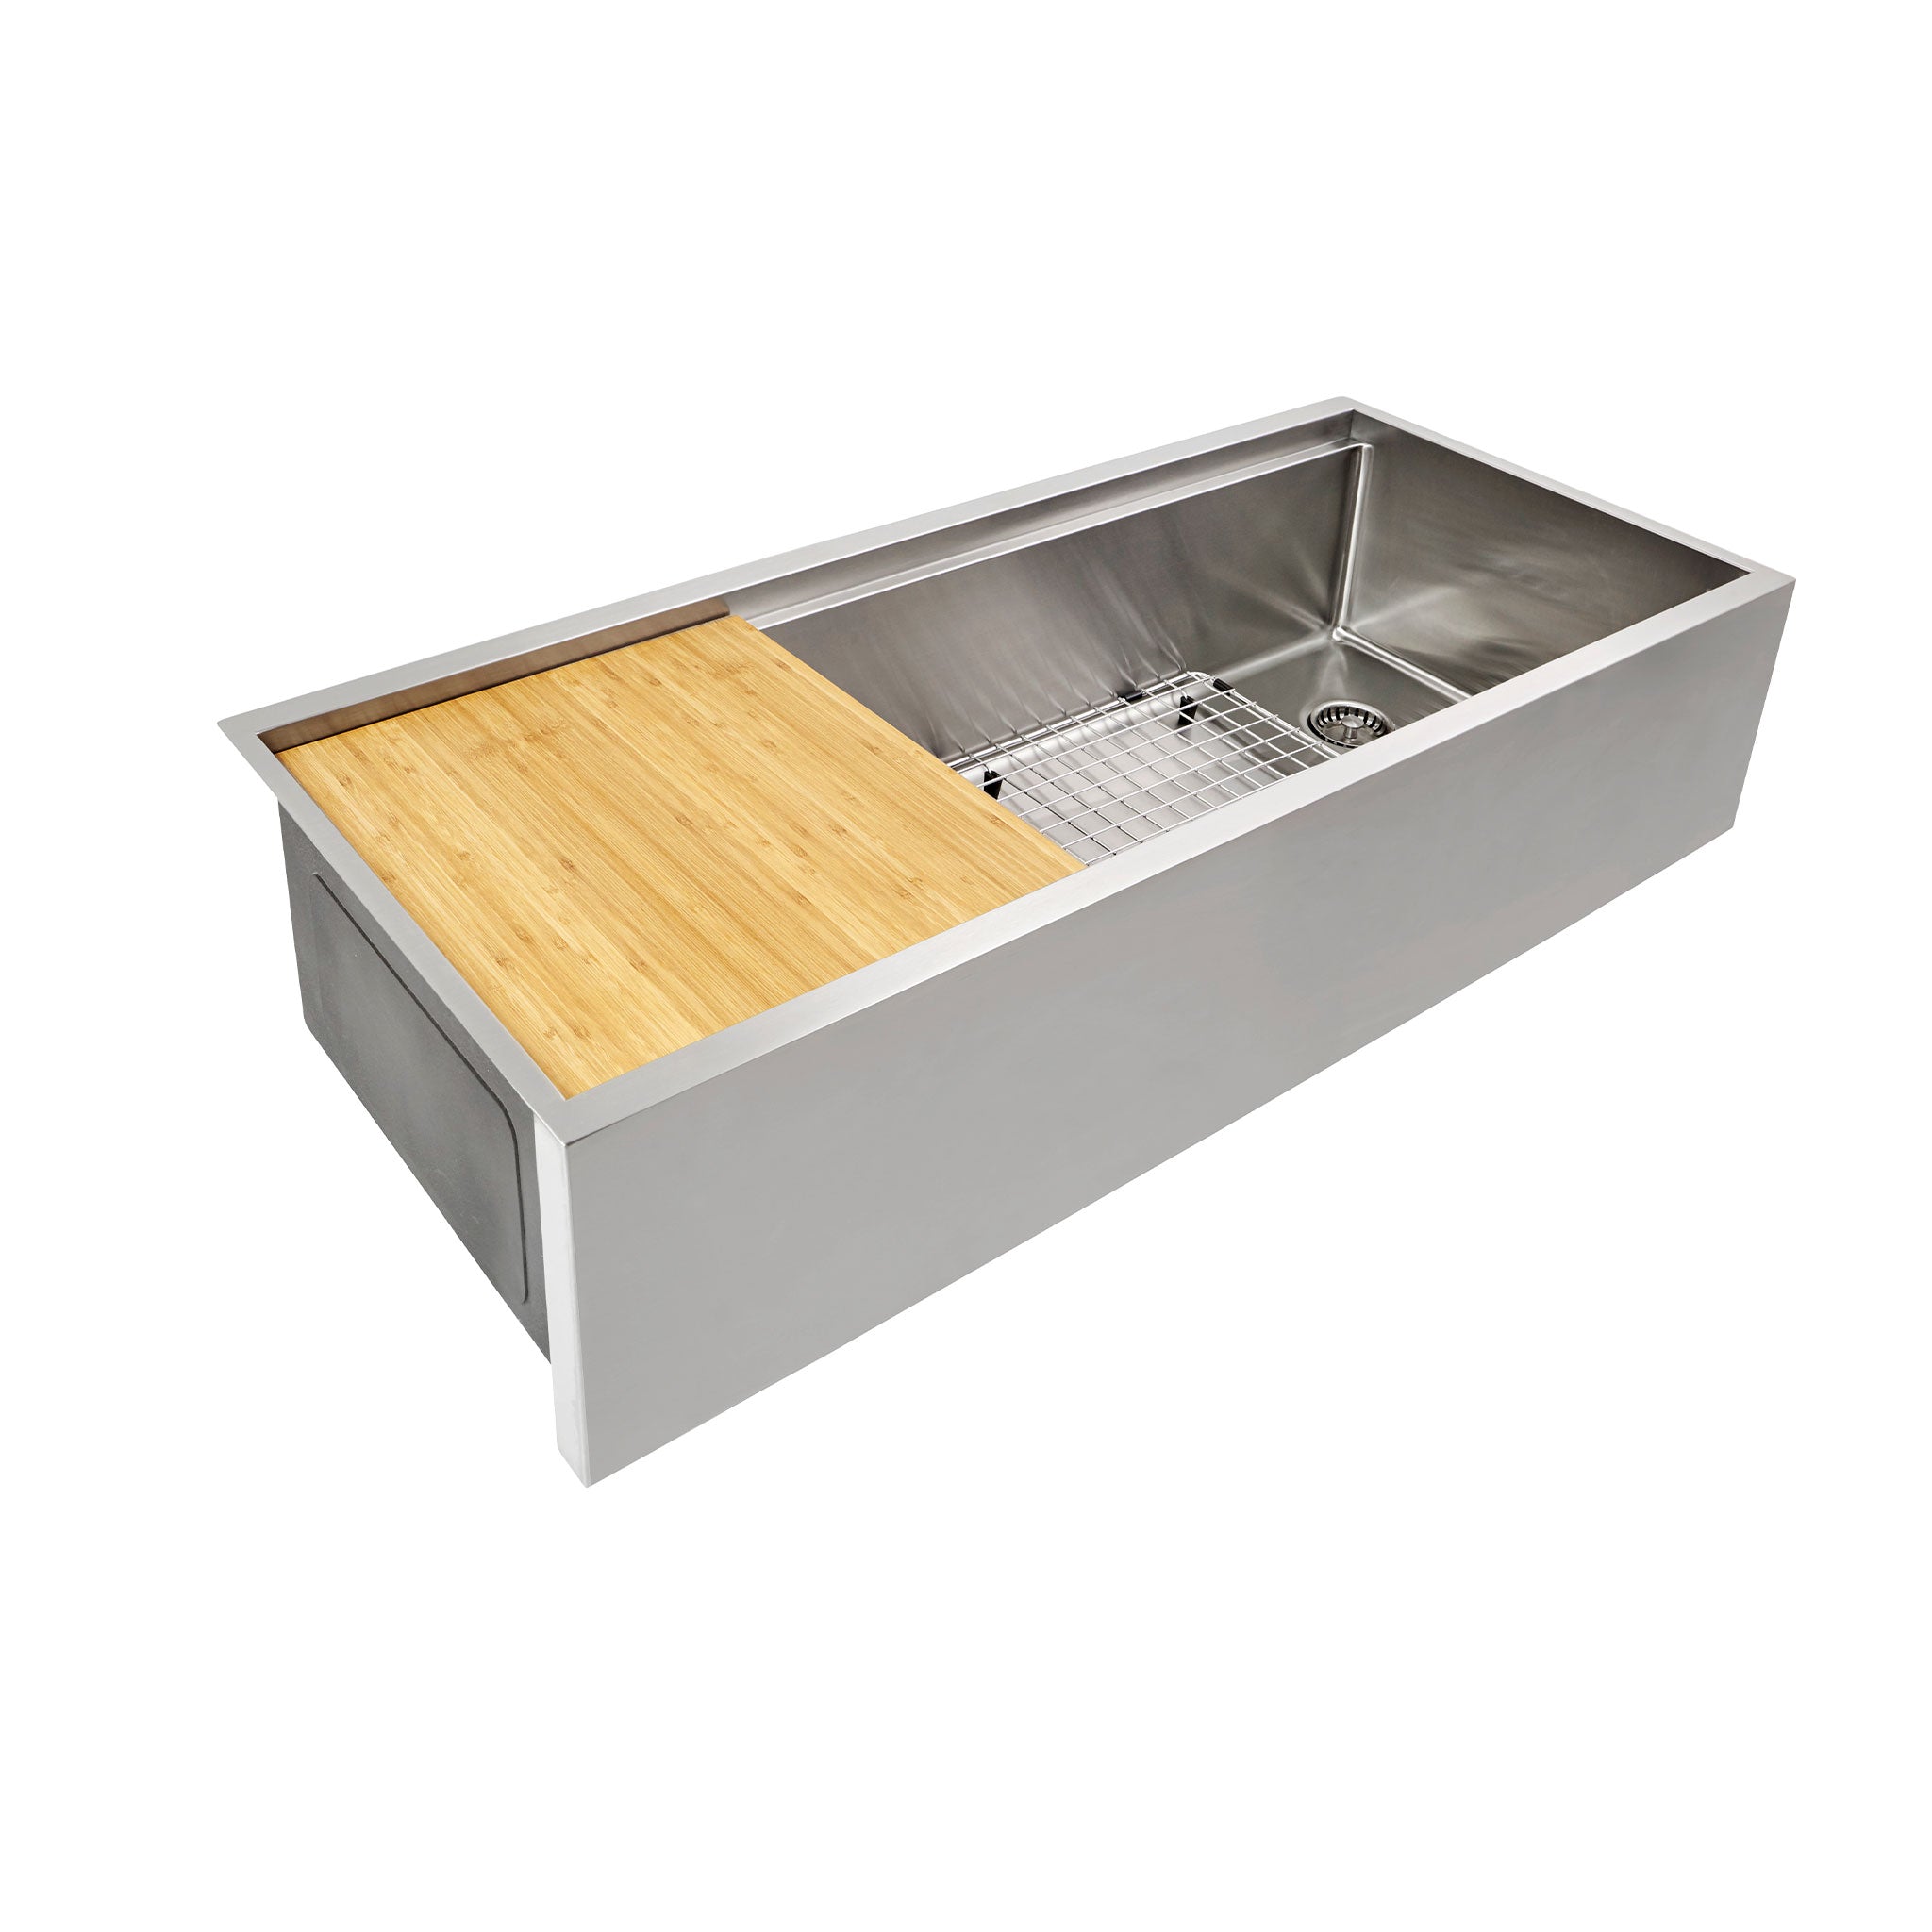 16 gauge stainless steel apron front farmhouse 46” workstation sink with offset drain on the right and Create Good Sinks seamless drain design